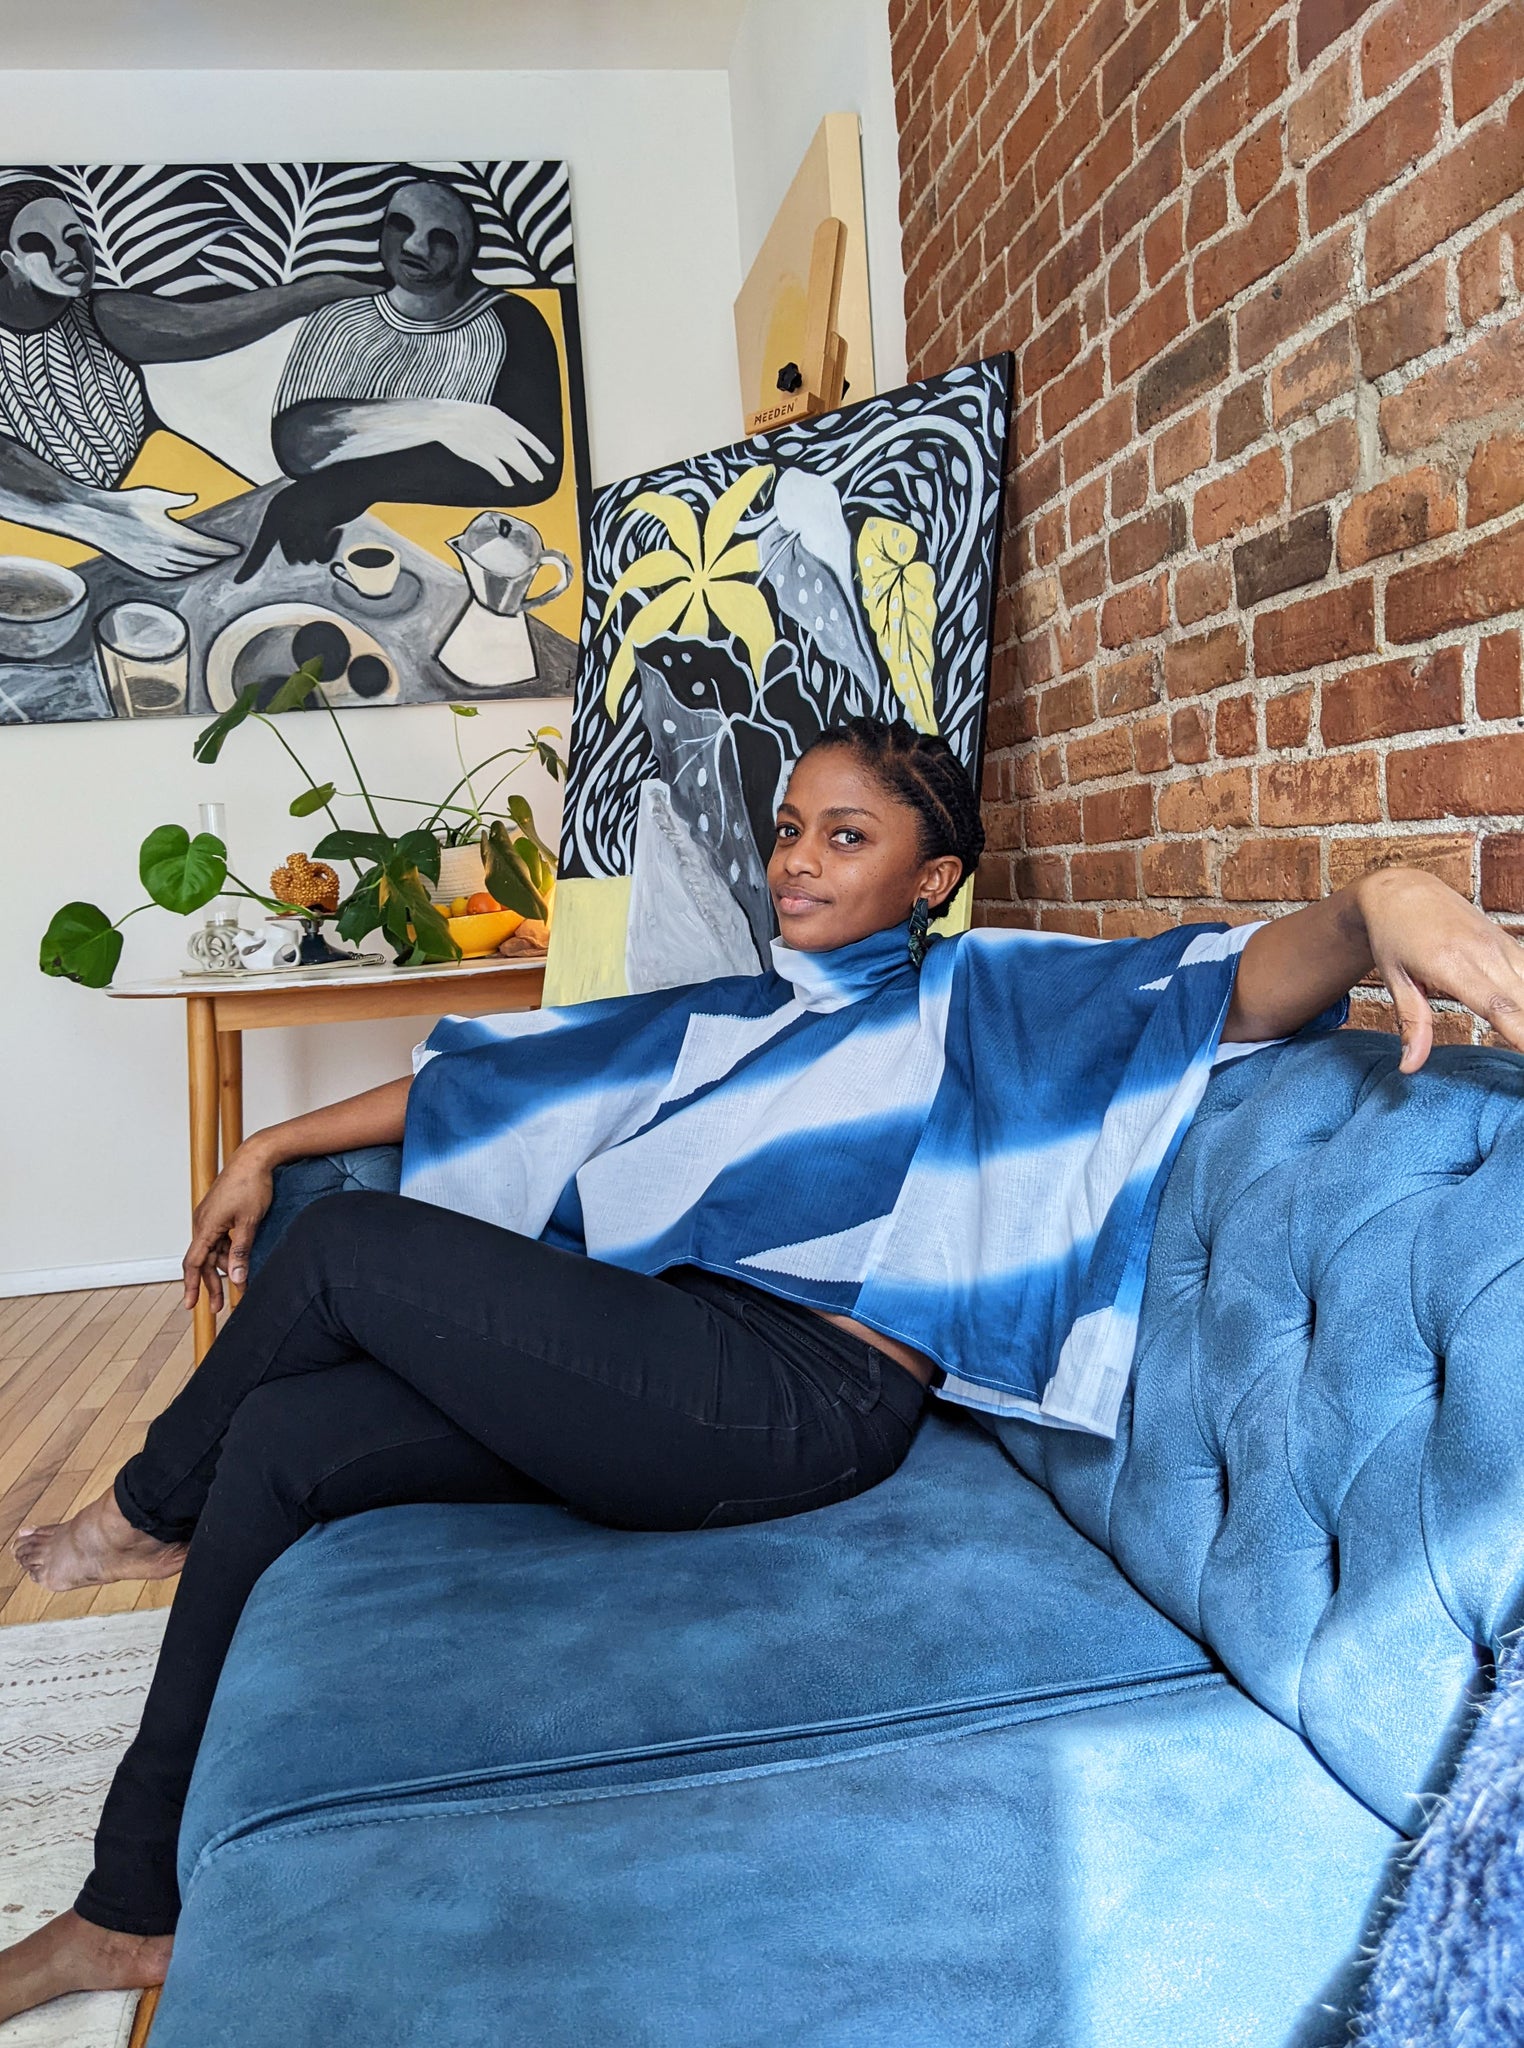 Portrait of Nathalie Jolivert reclining on blue sofa with her paintings hung on brick wall